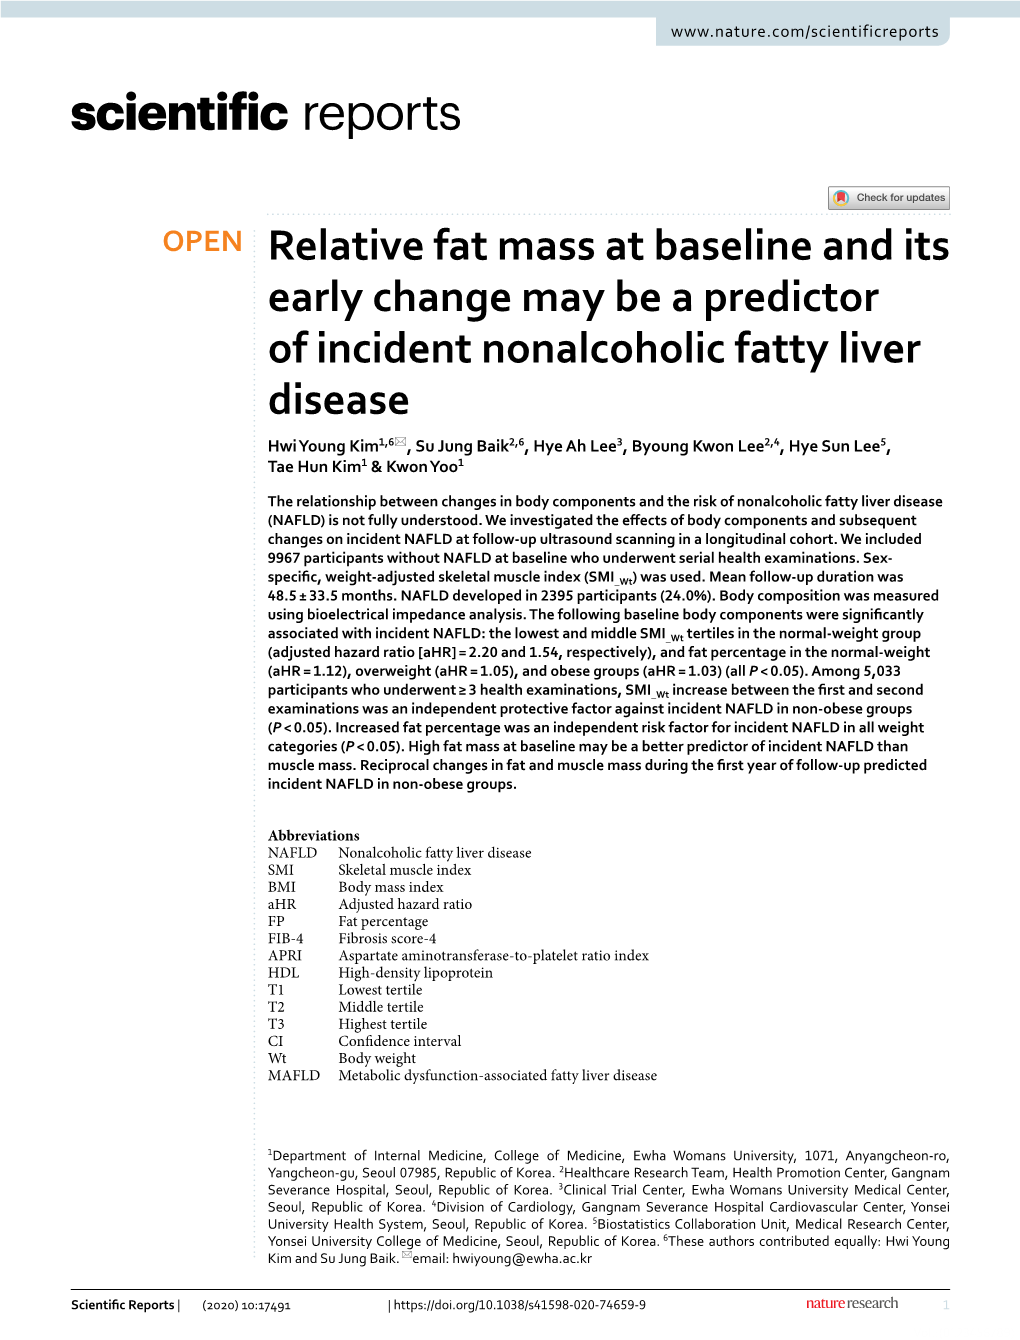 Relative Fat Mass at Baseline and Its Early Change May Be a Predictor Of